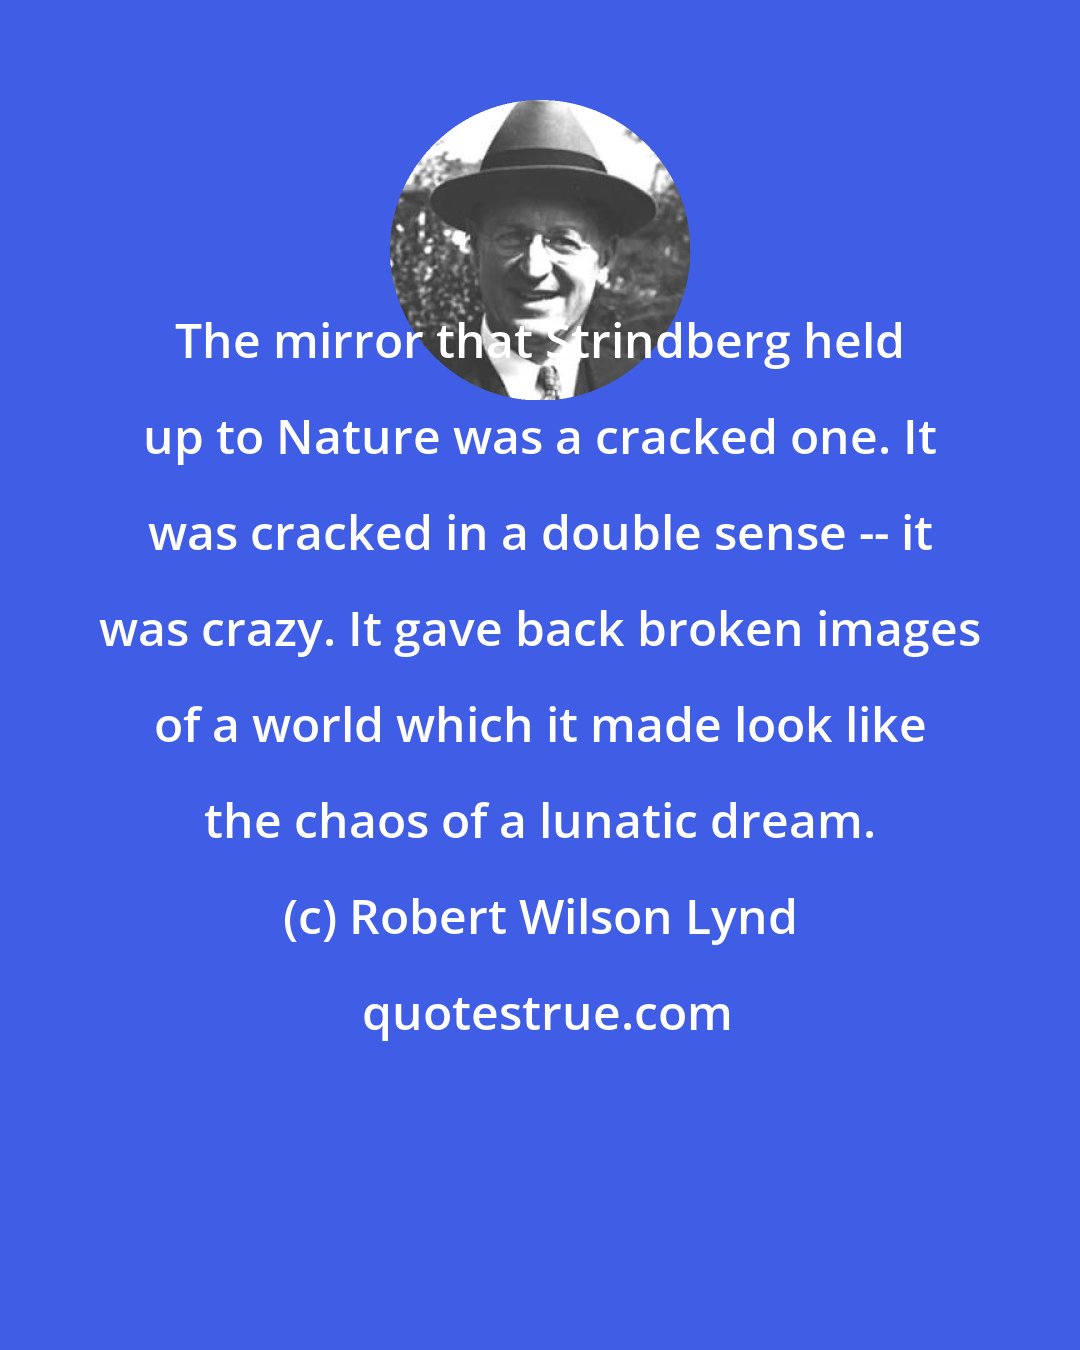 Robert Wilson Lynd: The mirror that Strindberg held up to Nature was a cracked one. It was cracked in a double sense -- it was crazy. It gave back broken images of a world which it made look like the chaos of a lunatic dream.